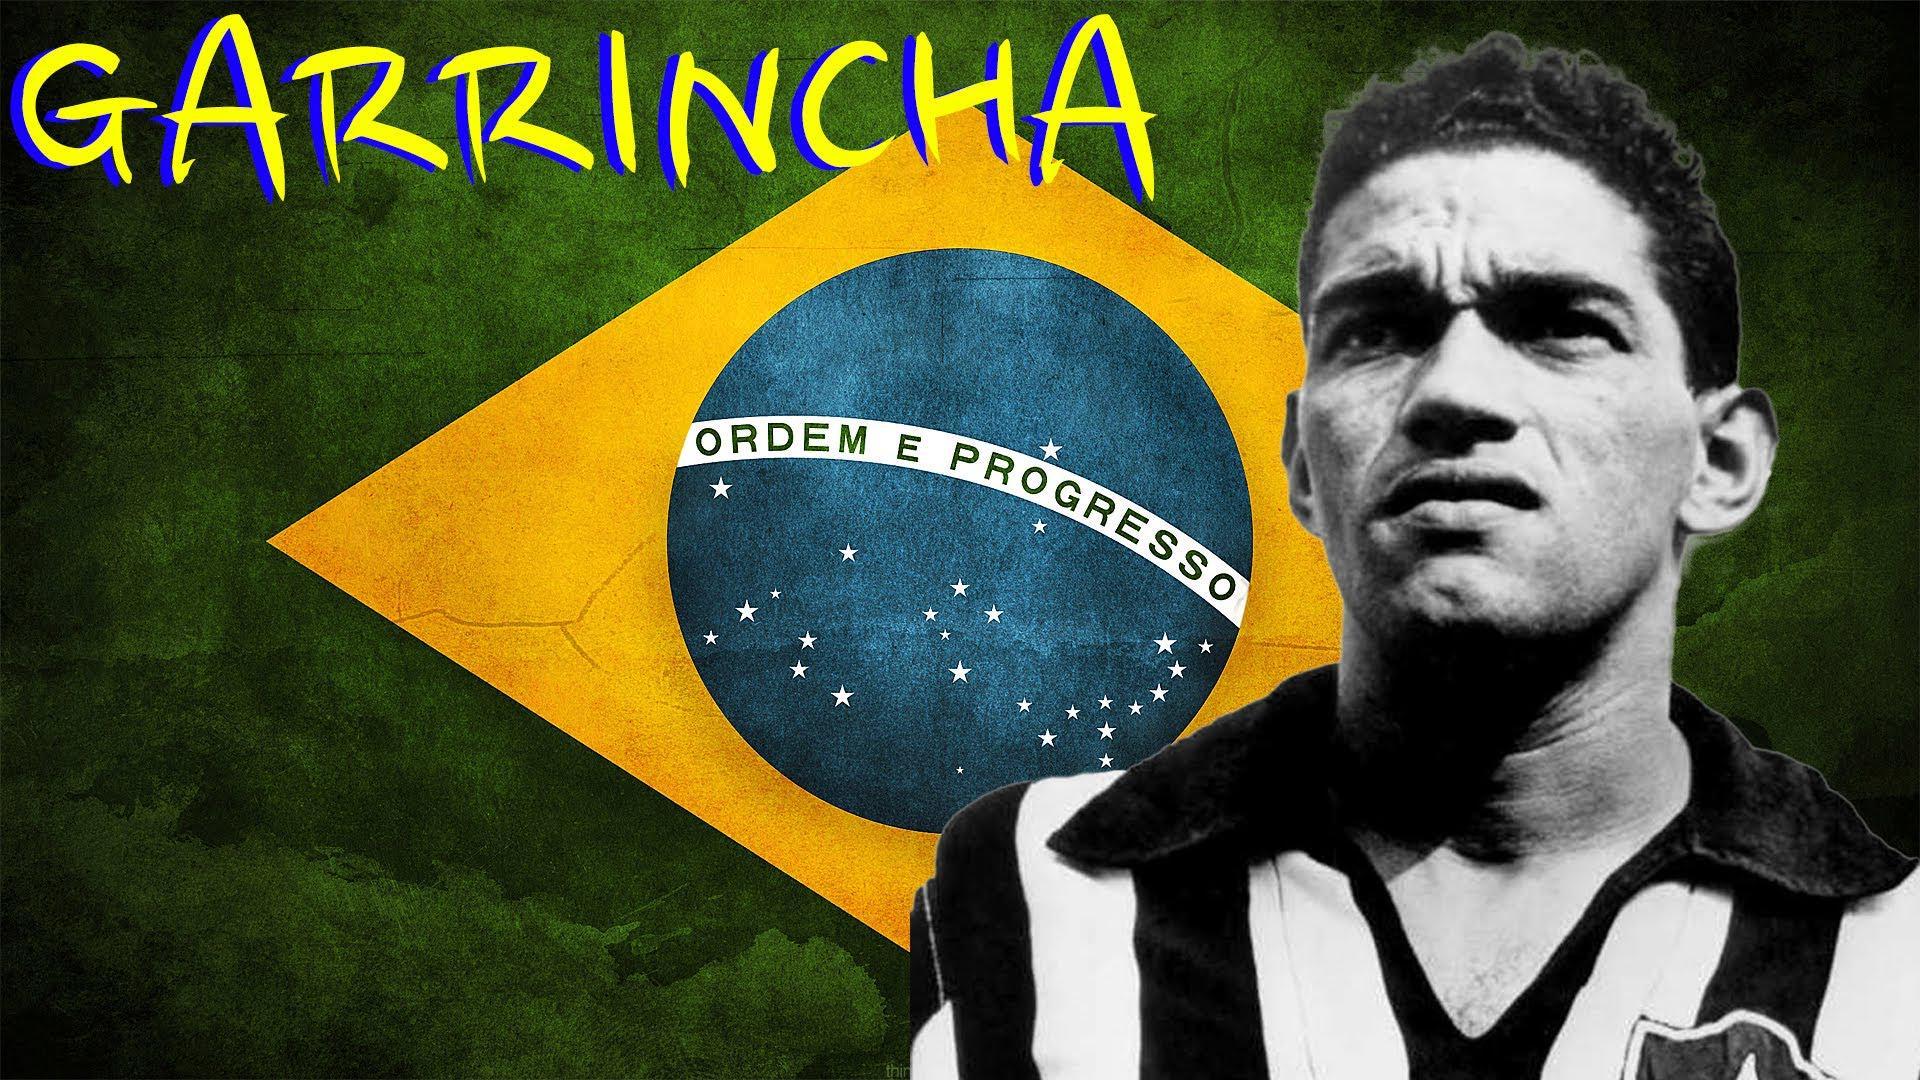 Stars starred in the memory of the World Cup. Garrincha is